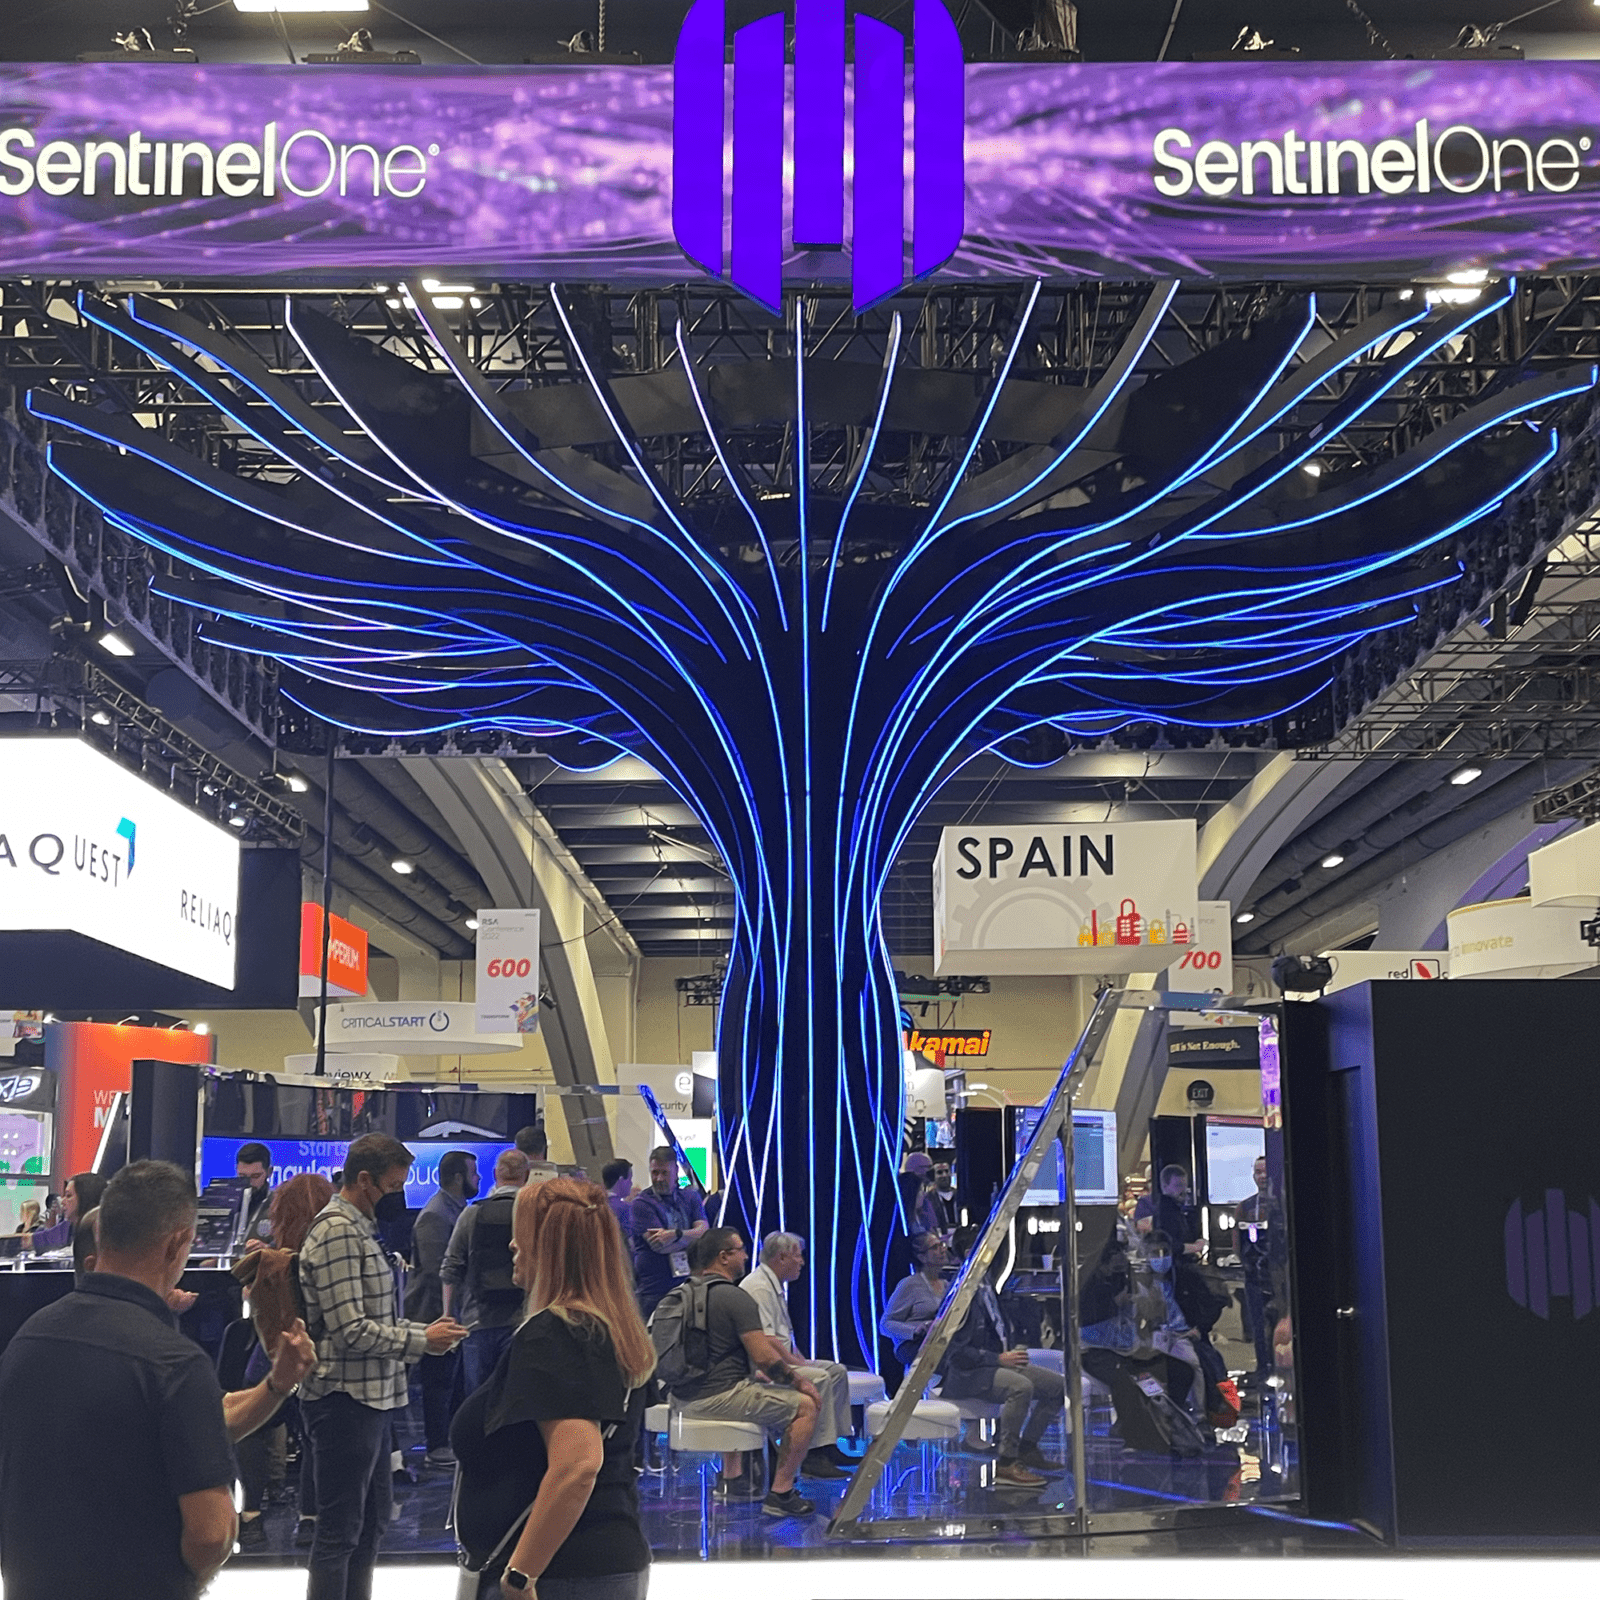 SentinelOne's exhibit featured a massive LED tree